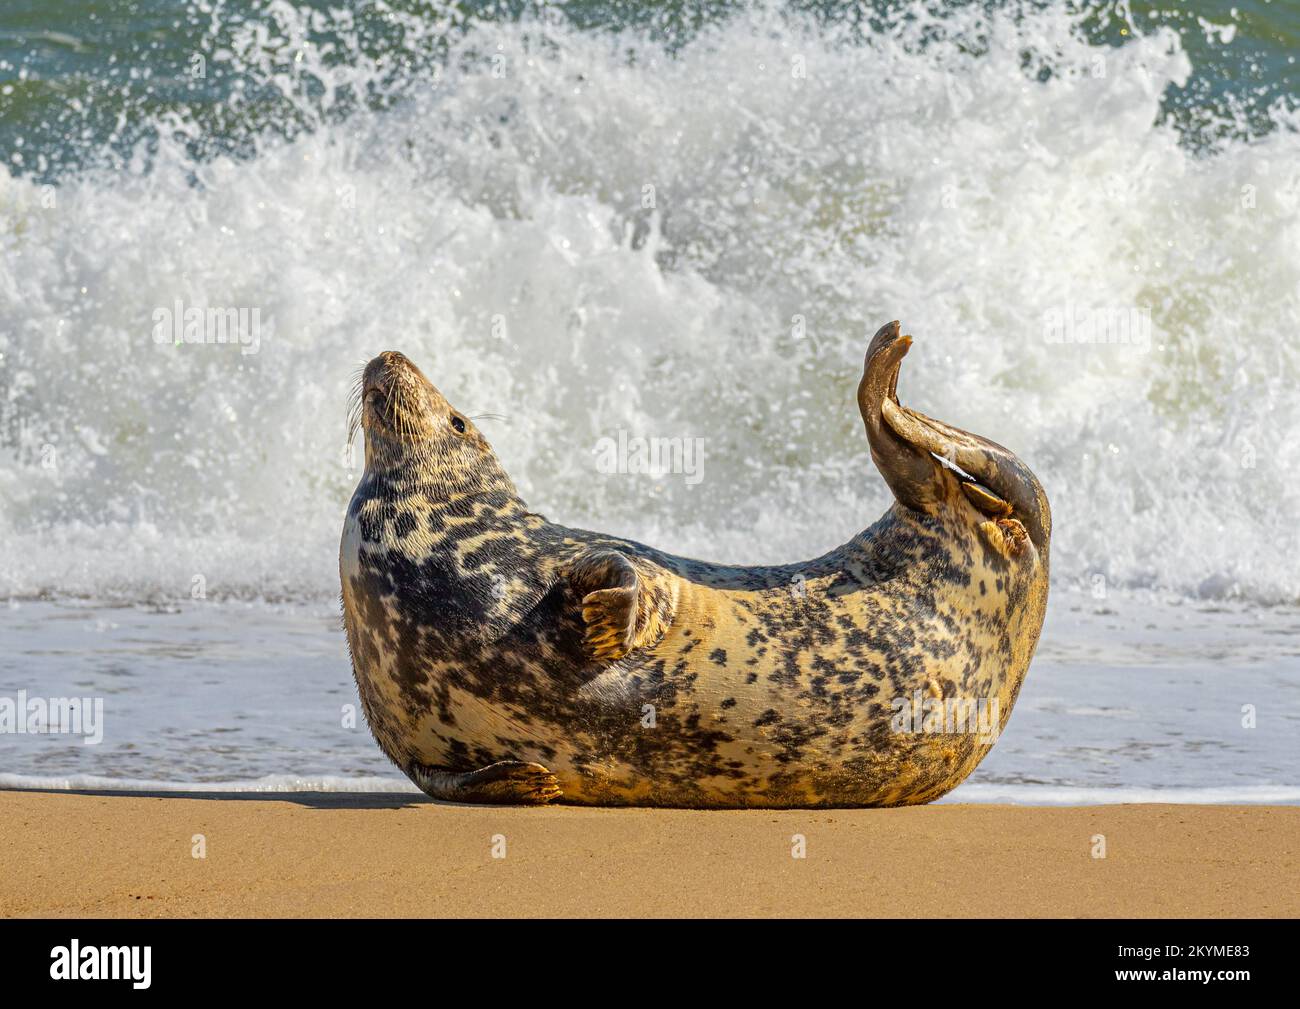 Golden brown coloured grey seal arching back on beach Stock Photo